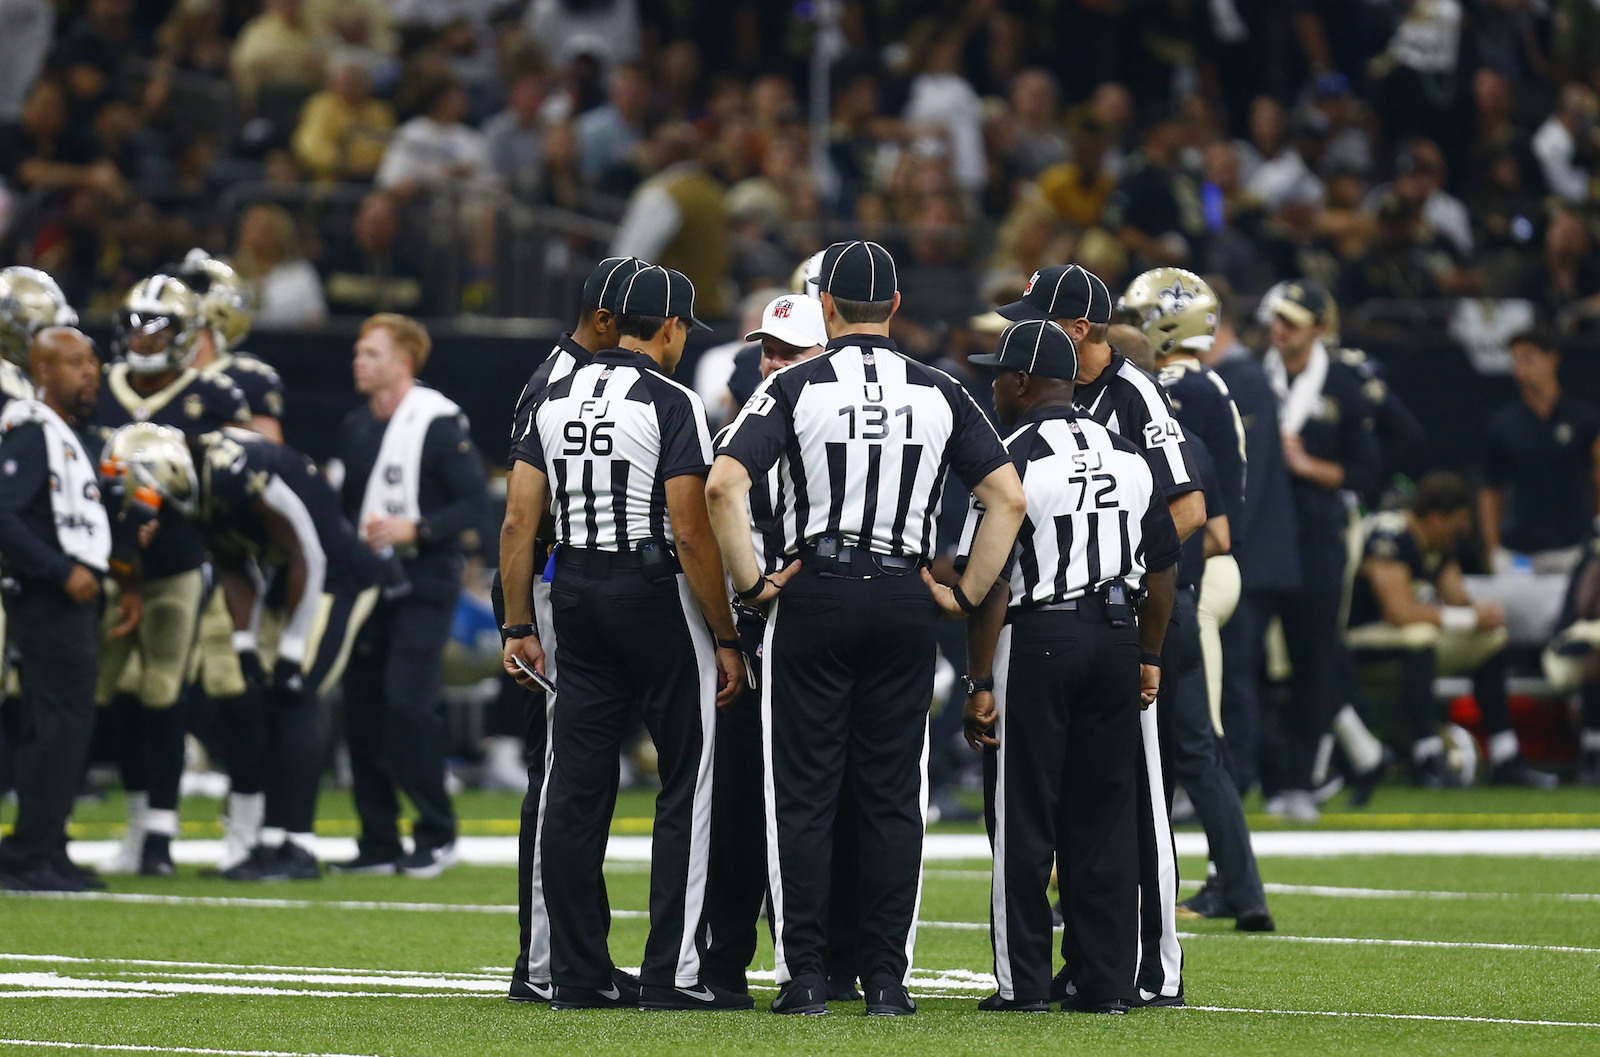 The Officials | NFL Football Operations